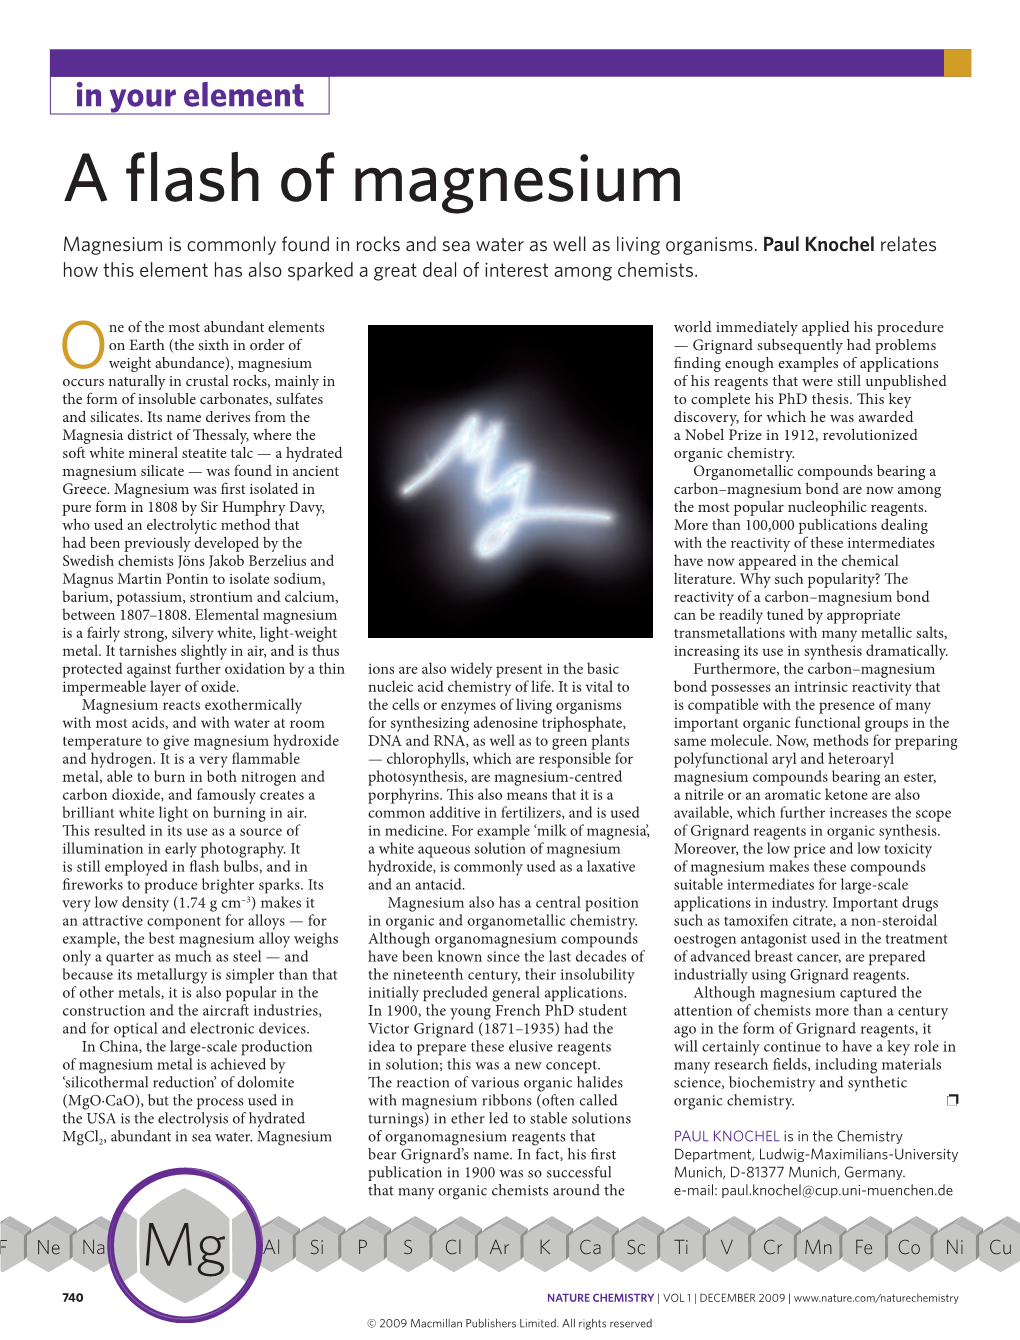 A Flash of Magnesium Magnesium Is Commonly Found in Rocks and Sea Water As Well As Living Organisms